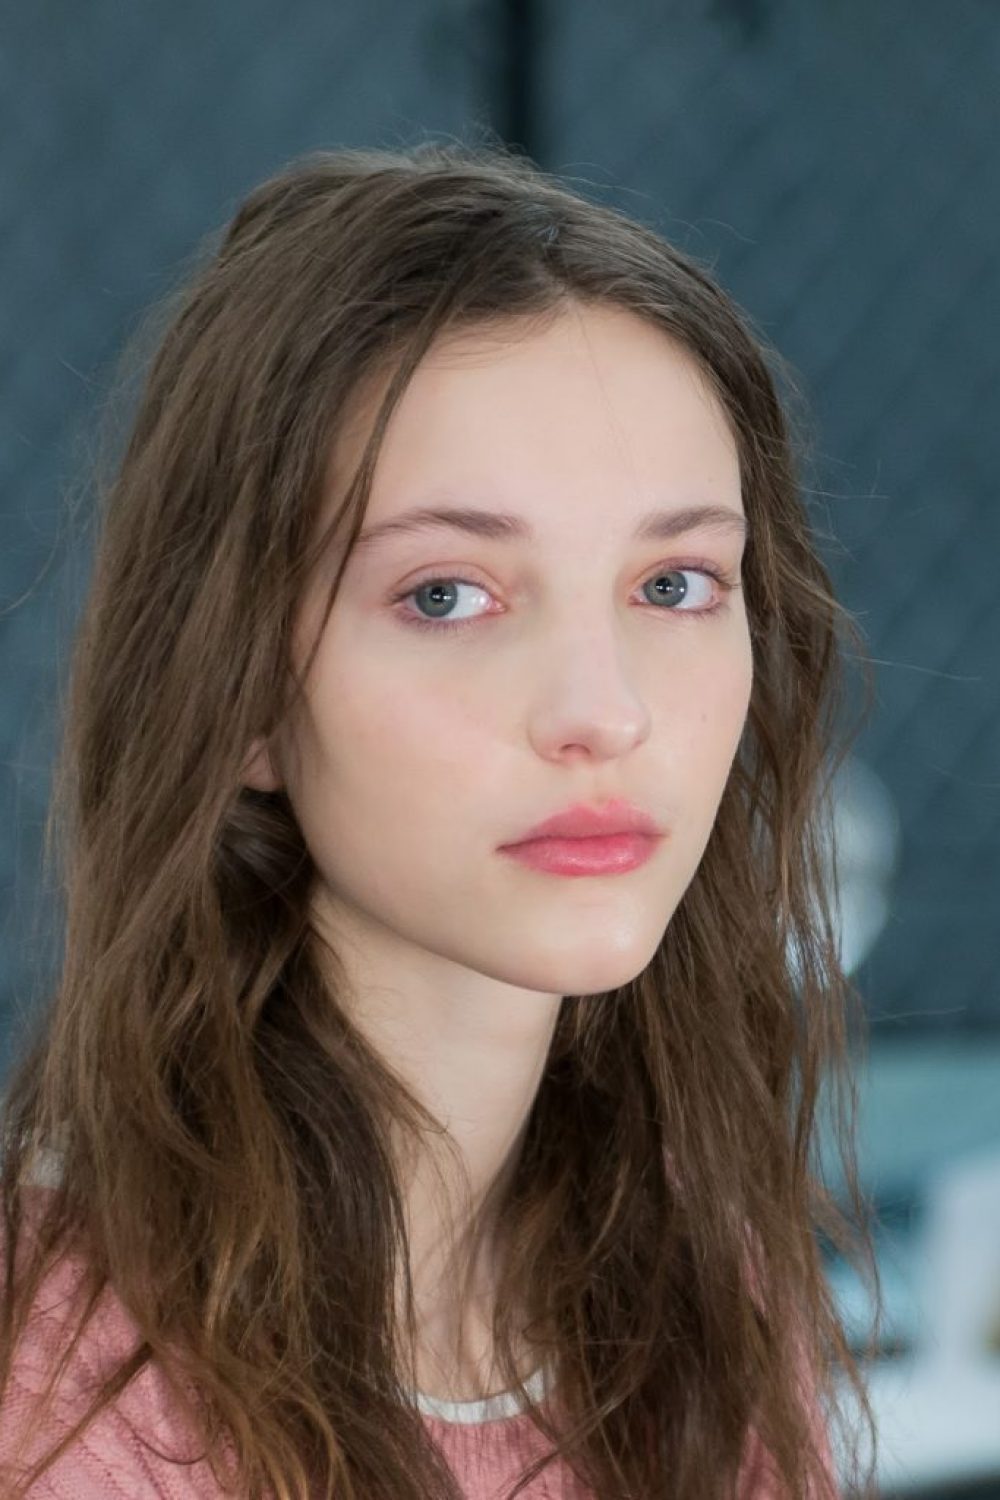 Jay Manueal beauty looks from fall fashion week 